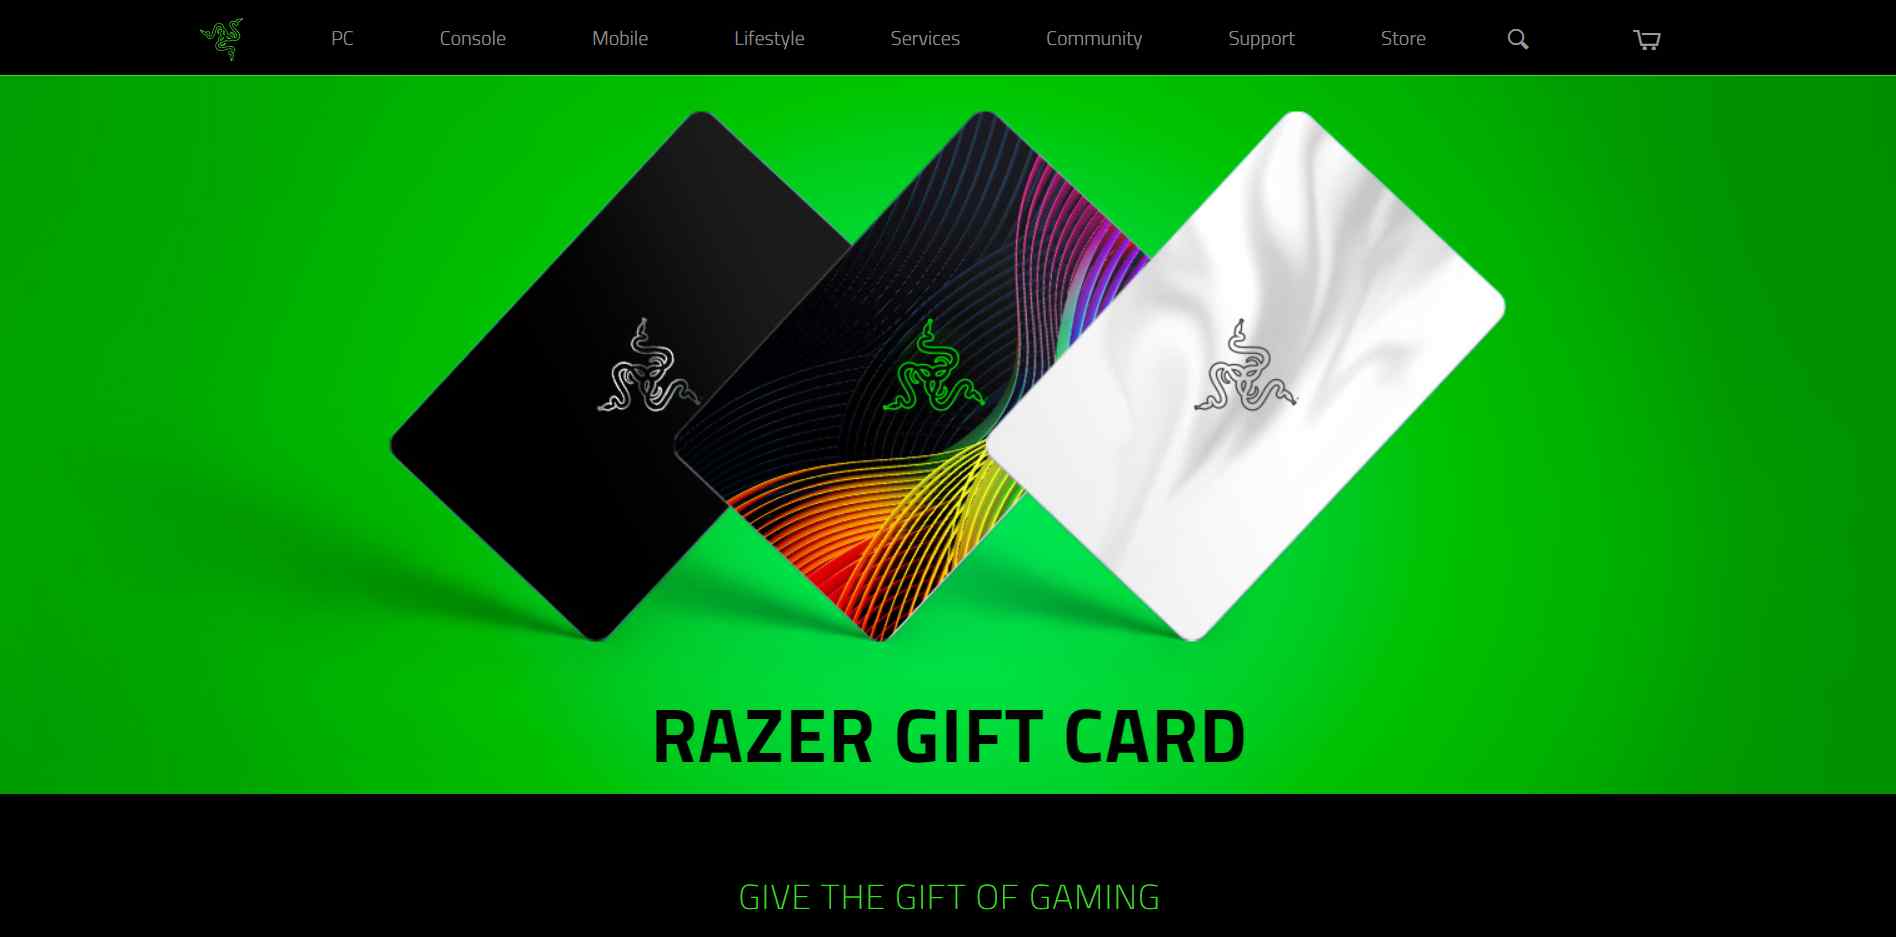 Razer Gold Gift Card is a gaming card that PC gamers and those who play games online love and can get.